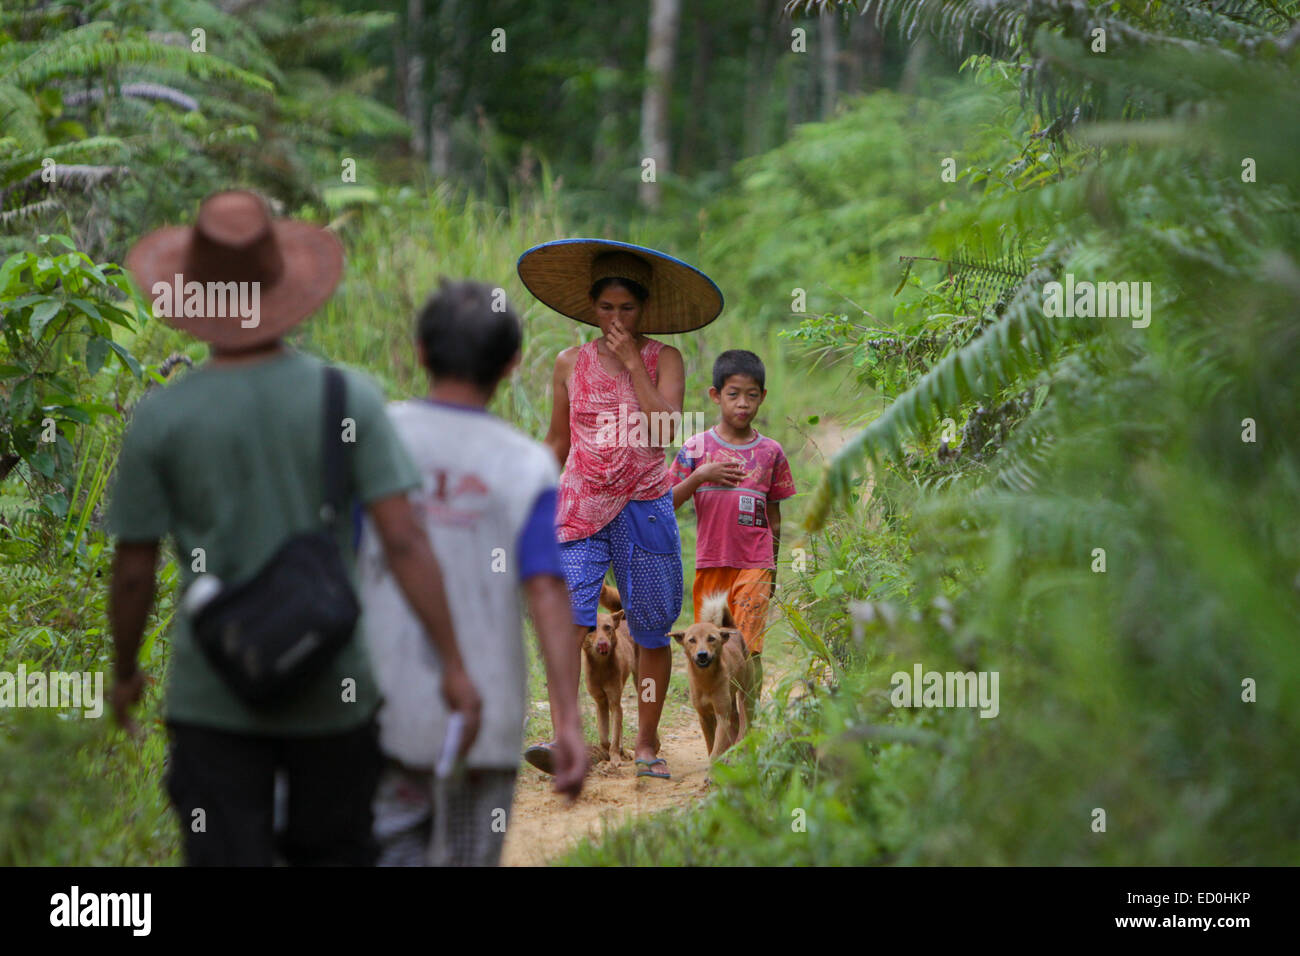 A woman with a child and dogs walking on a rural pathway, travelling in opposite direction to men during an ecotourism assessment. Stock Photo